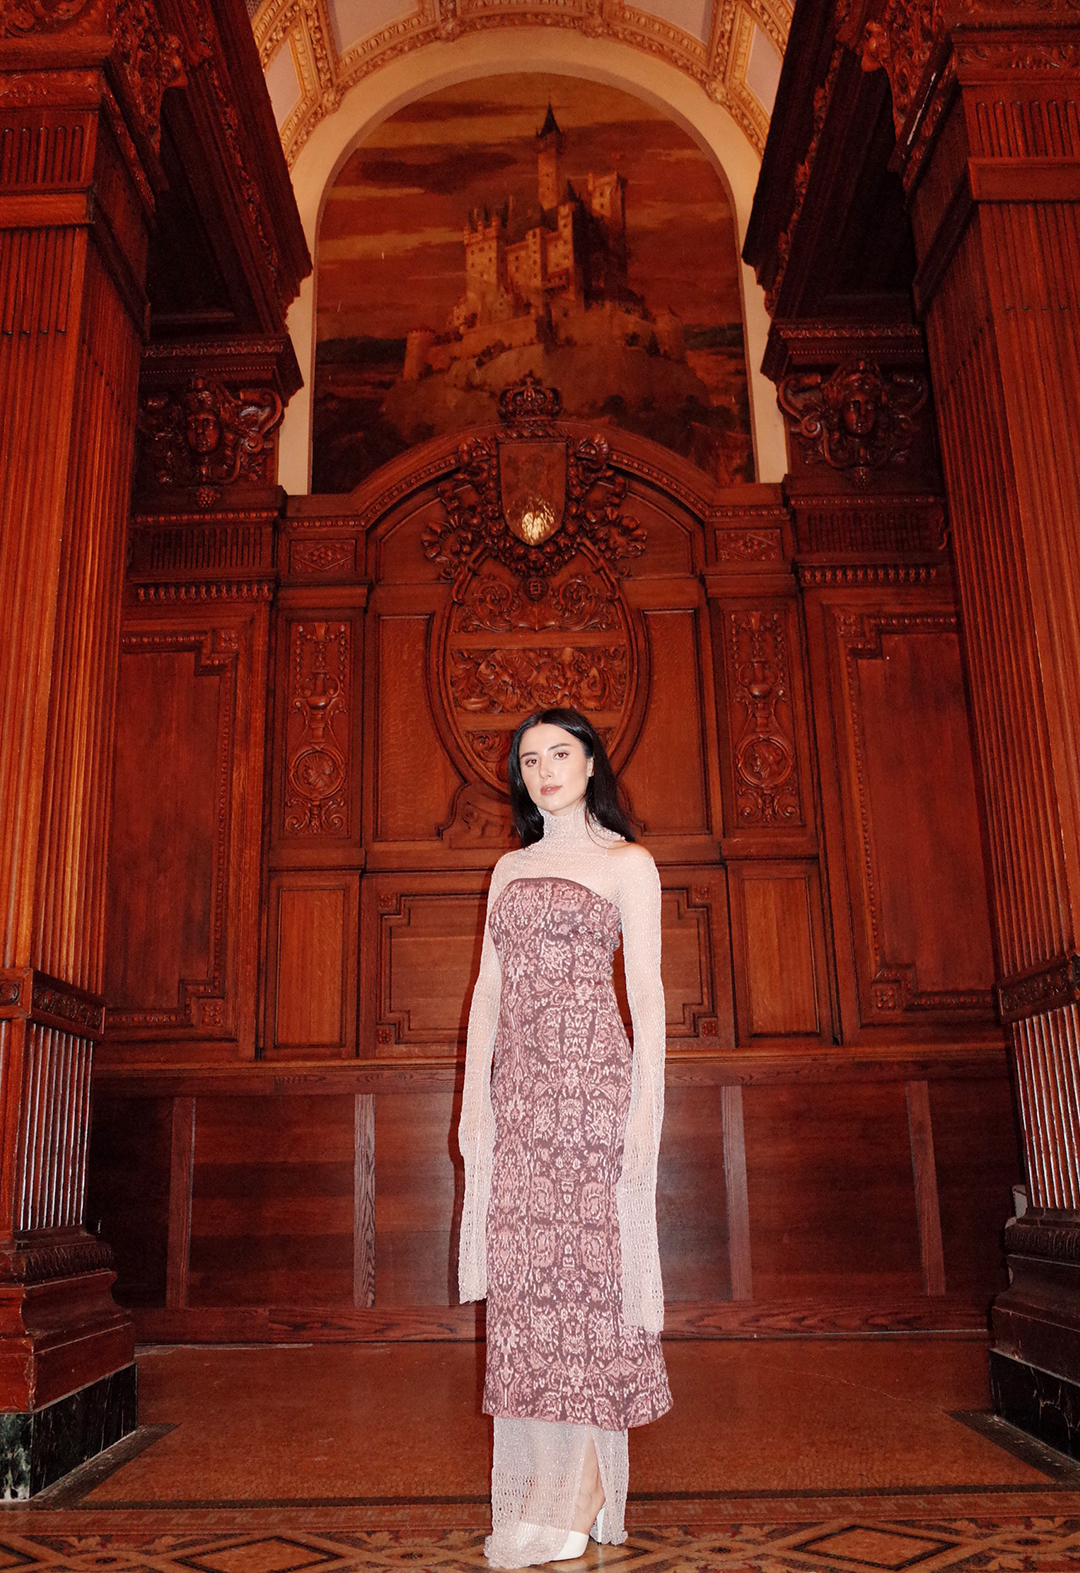 A model standing in a room, wearing a carpet inspired tube dress layered over sheer pointelle dress. The walls in the background are covered with wooden carved columns.